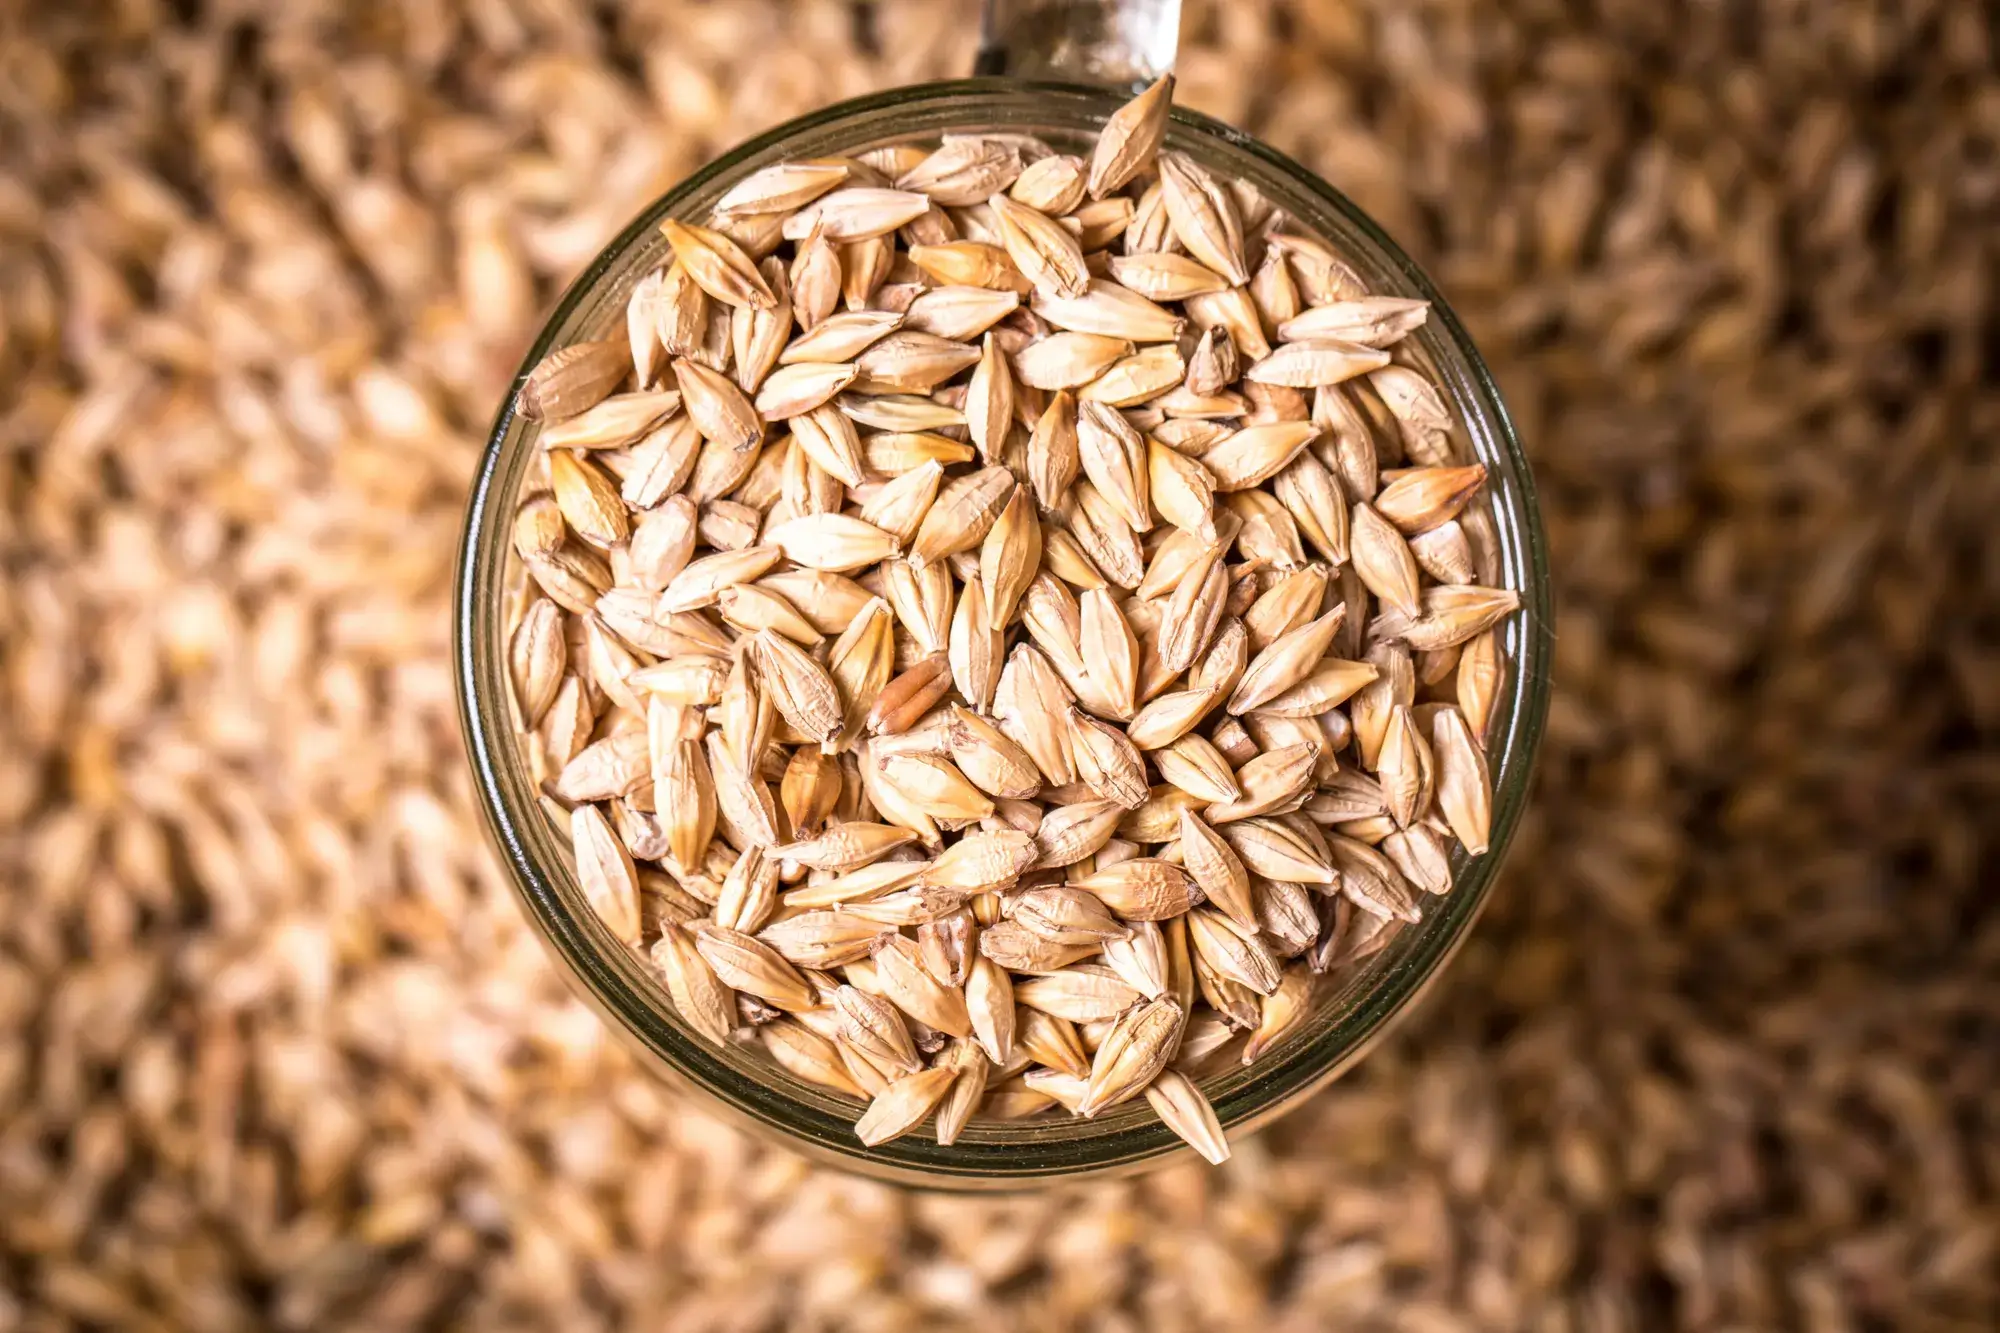 The most common grains used for beer